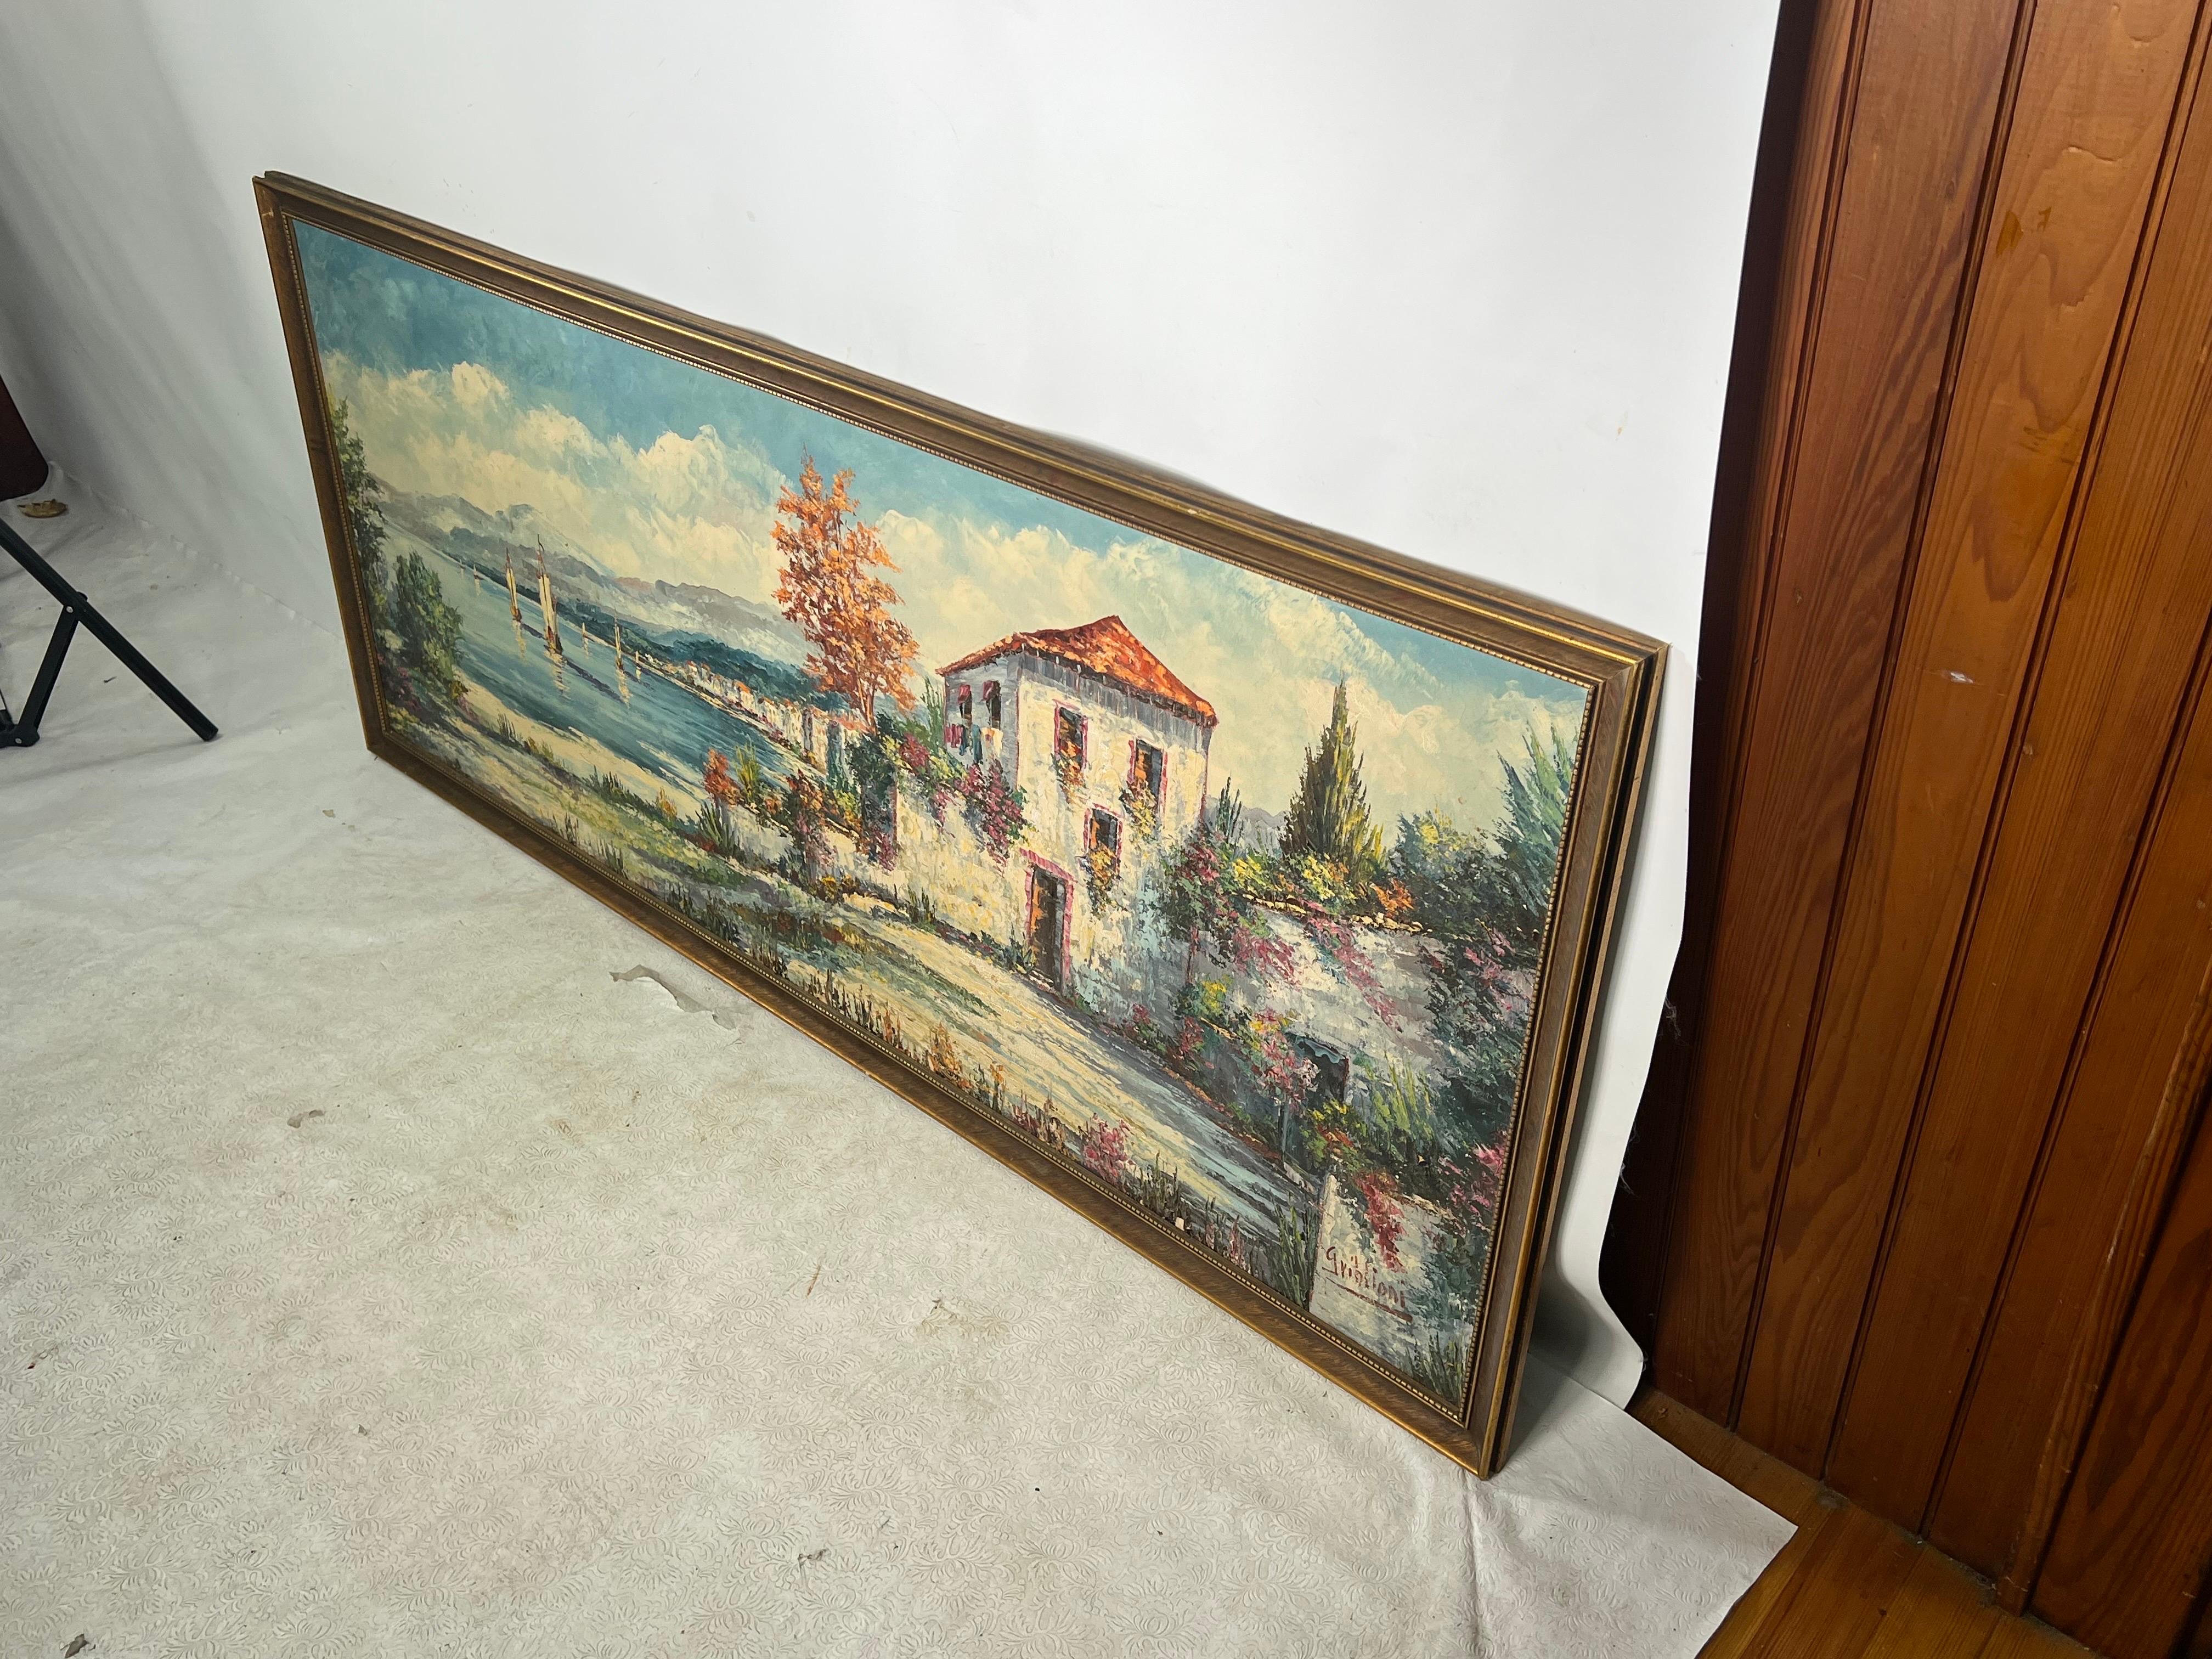 For sale is this very nice well done mid century oil painting.